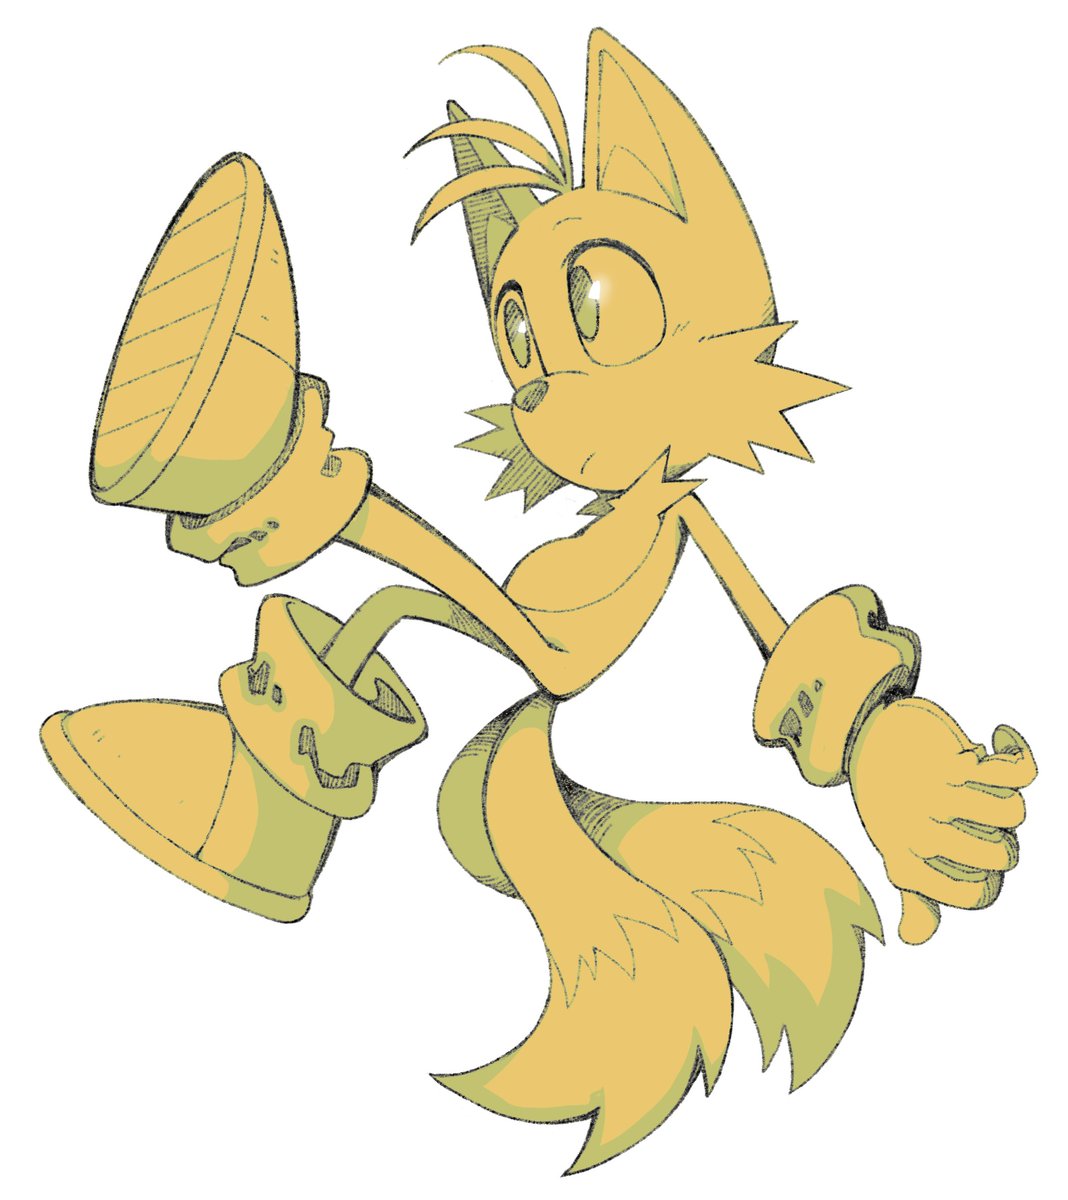 「Today's doodle~#SonicTheHedgehog #Tails 」|Kiiのイラスト